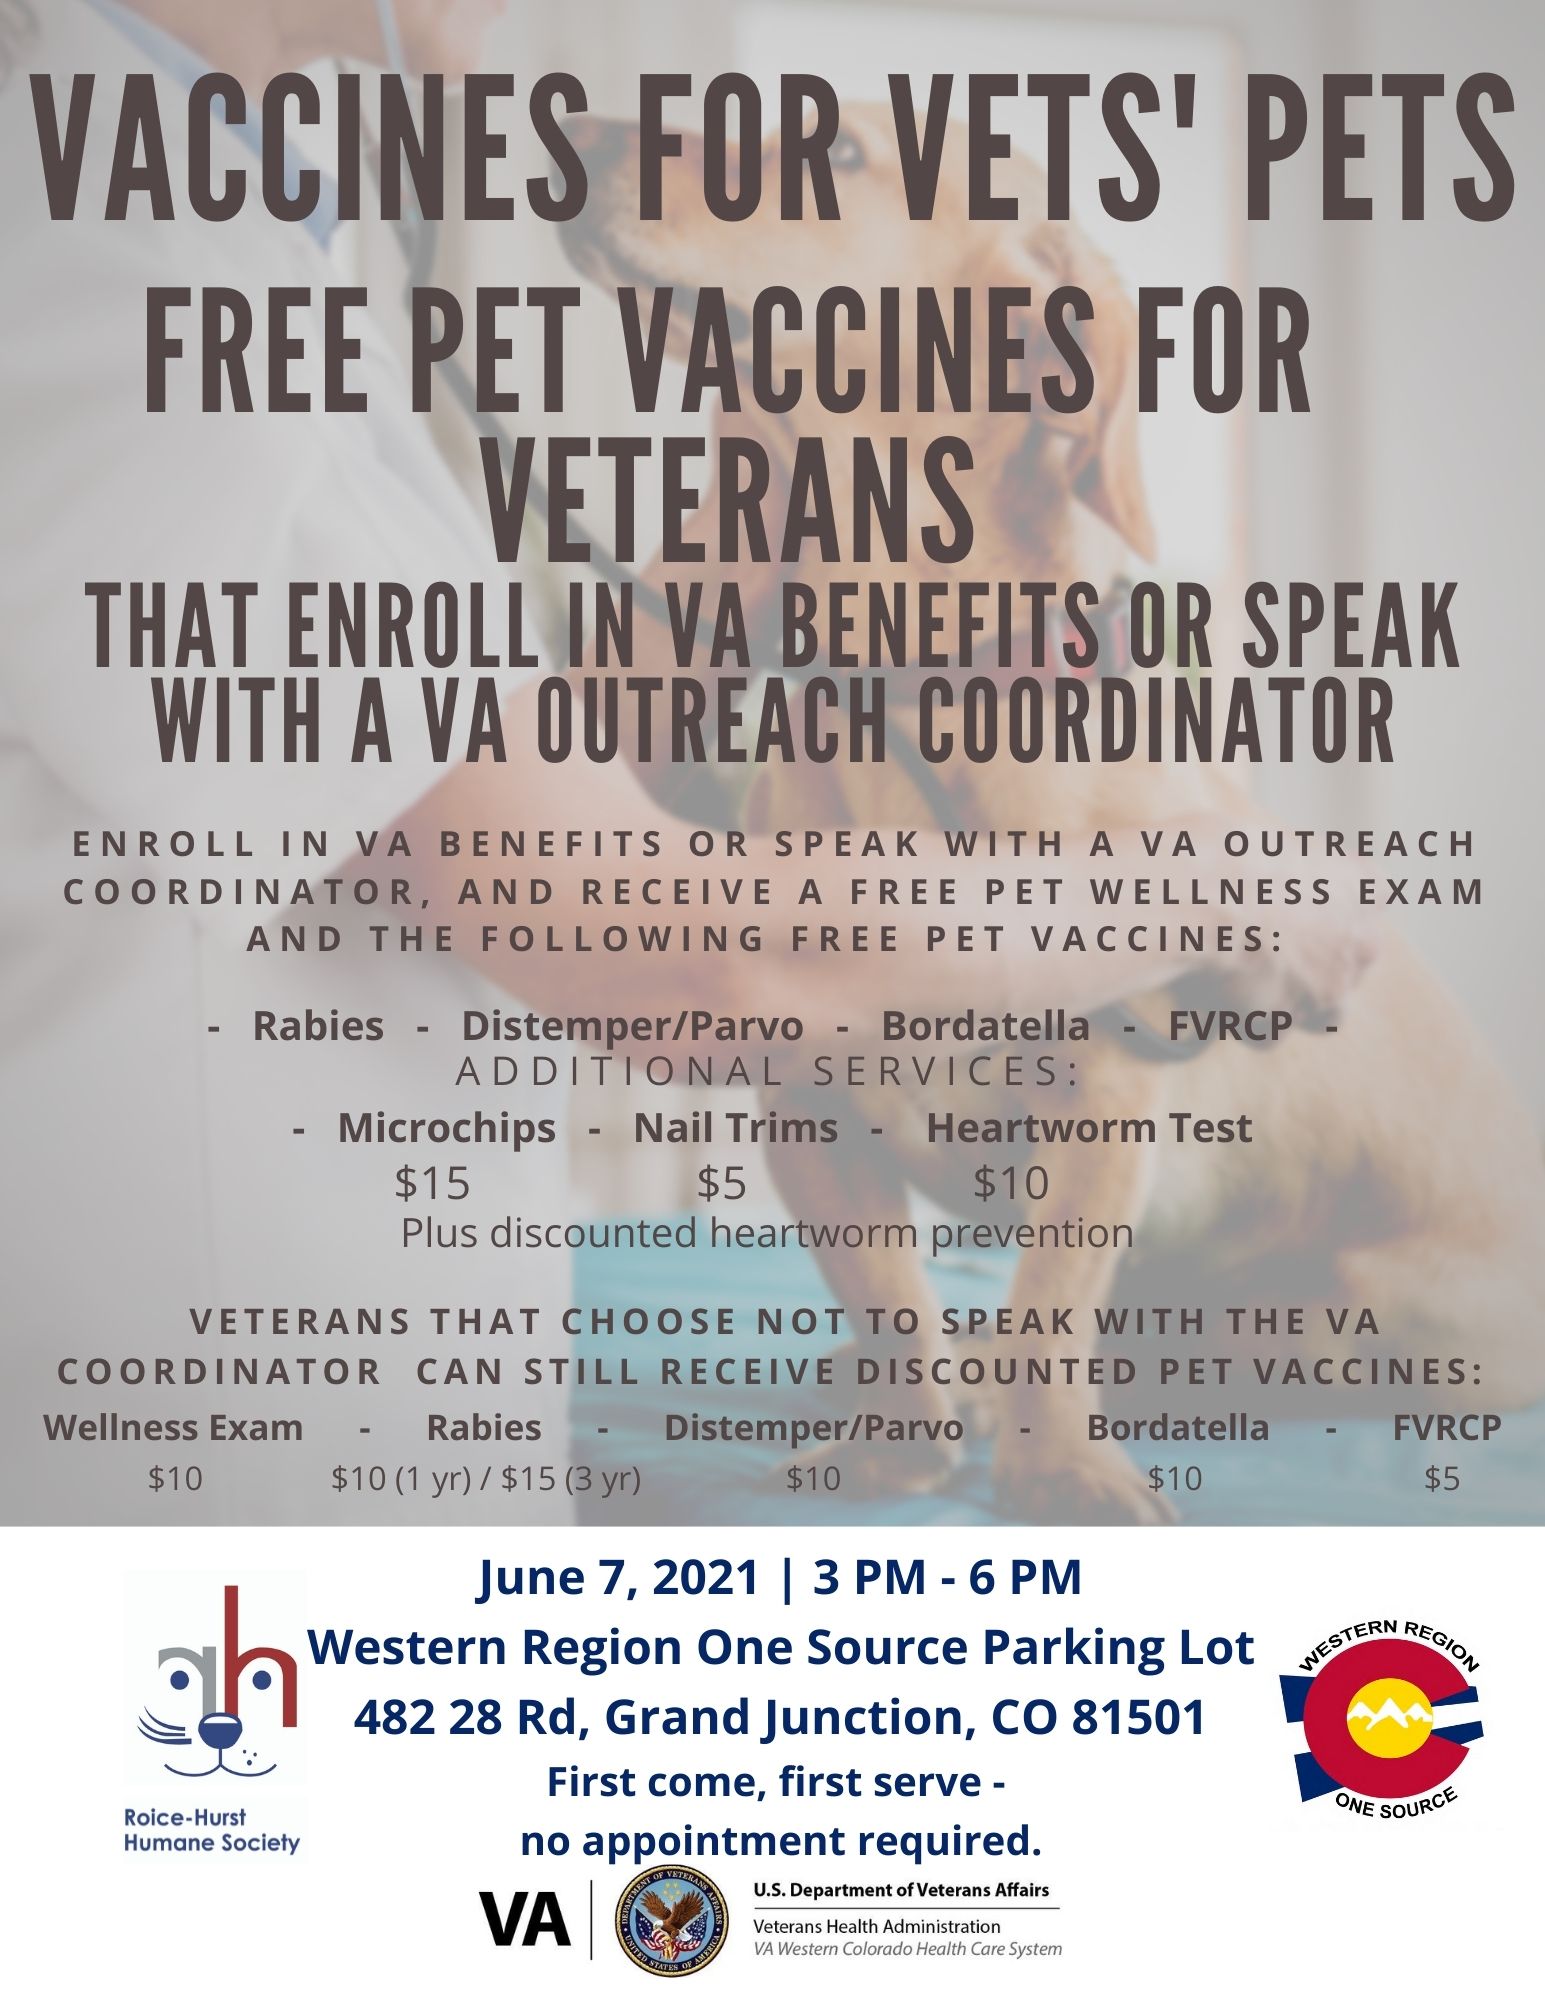 Vaccines for Vets’ Pets